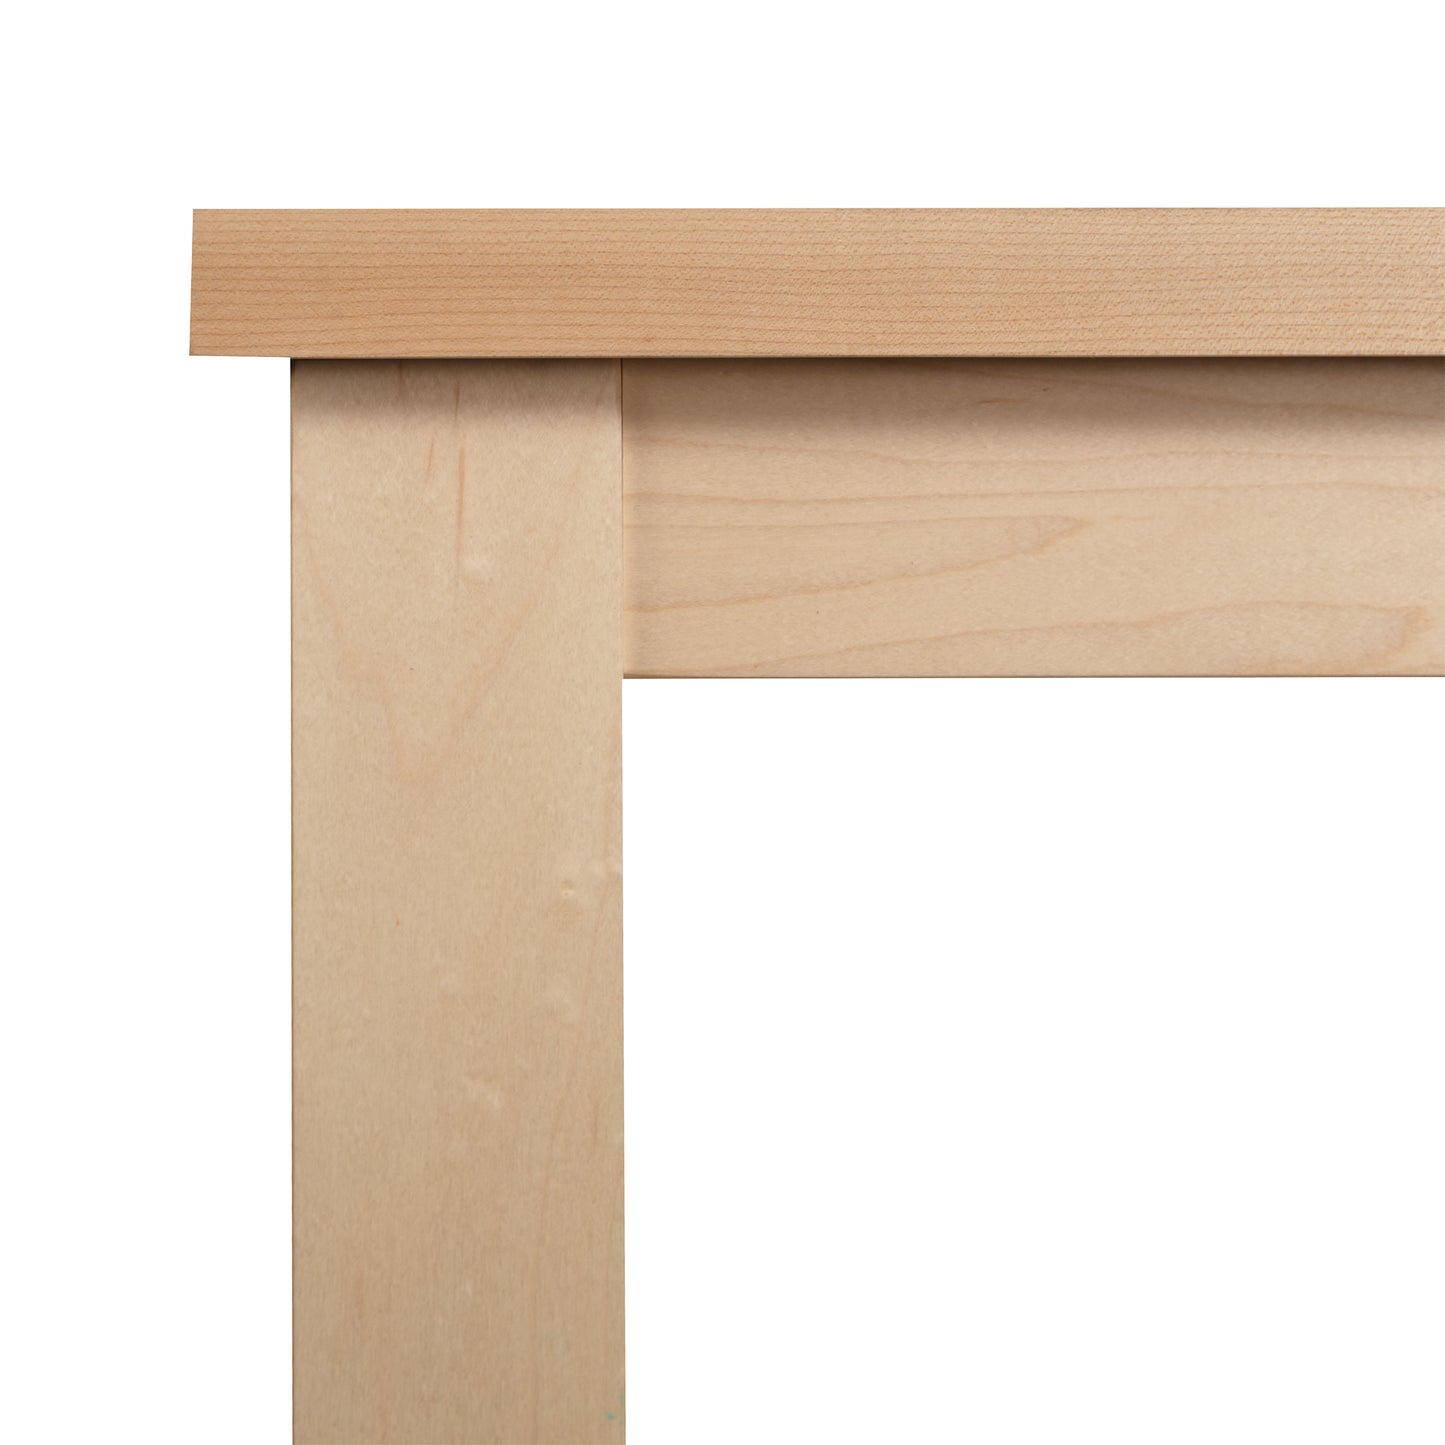 Close-up view of Lyndon Furniture's Modern Mission Parsons Solid Top Table - Maple - Clearance arranged in a T-shape, showing the texture and grain of the wood against a white background.